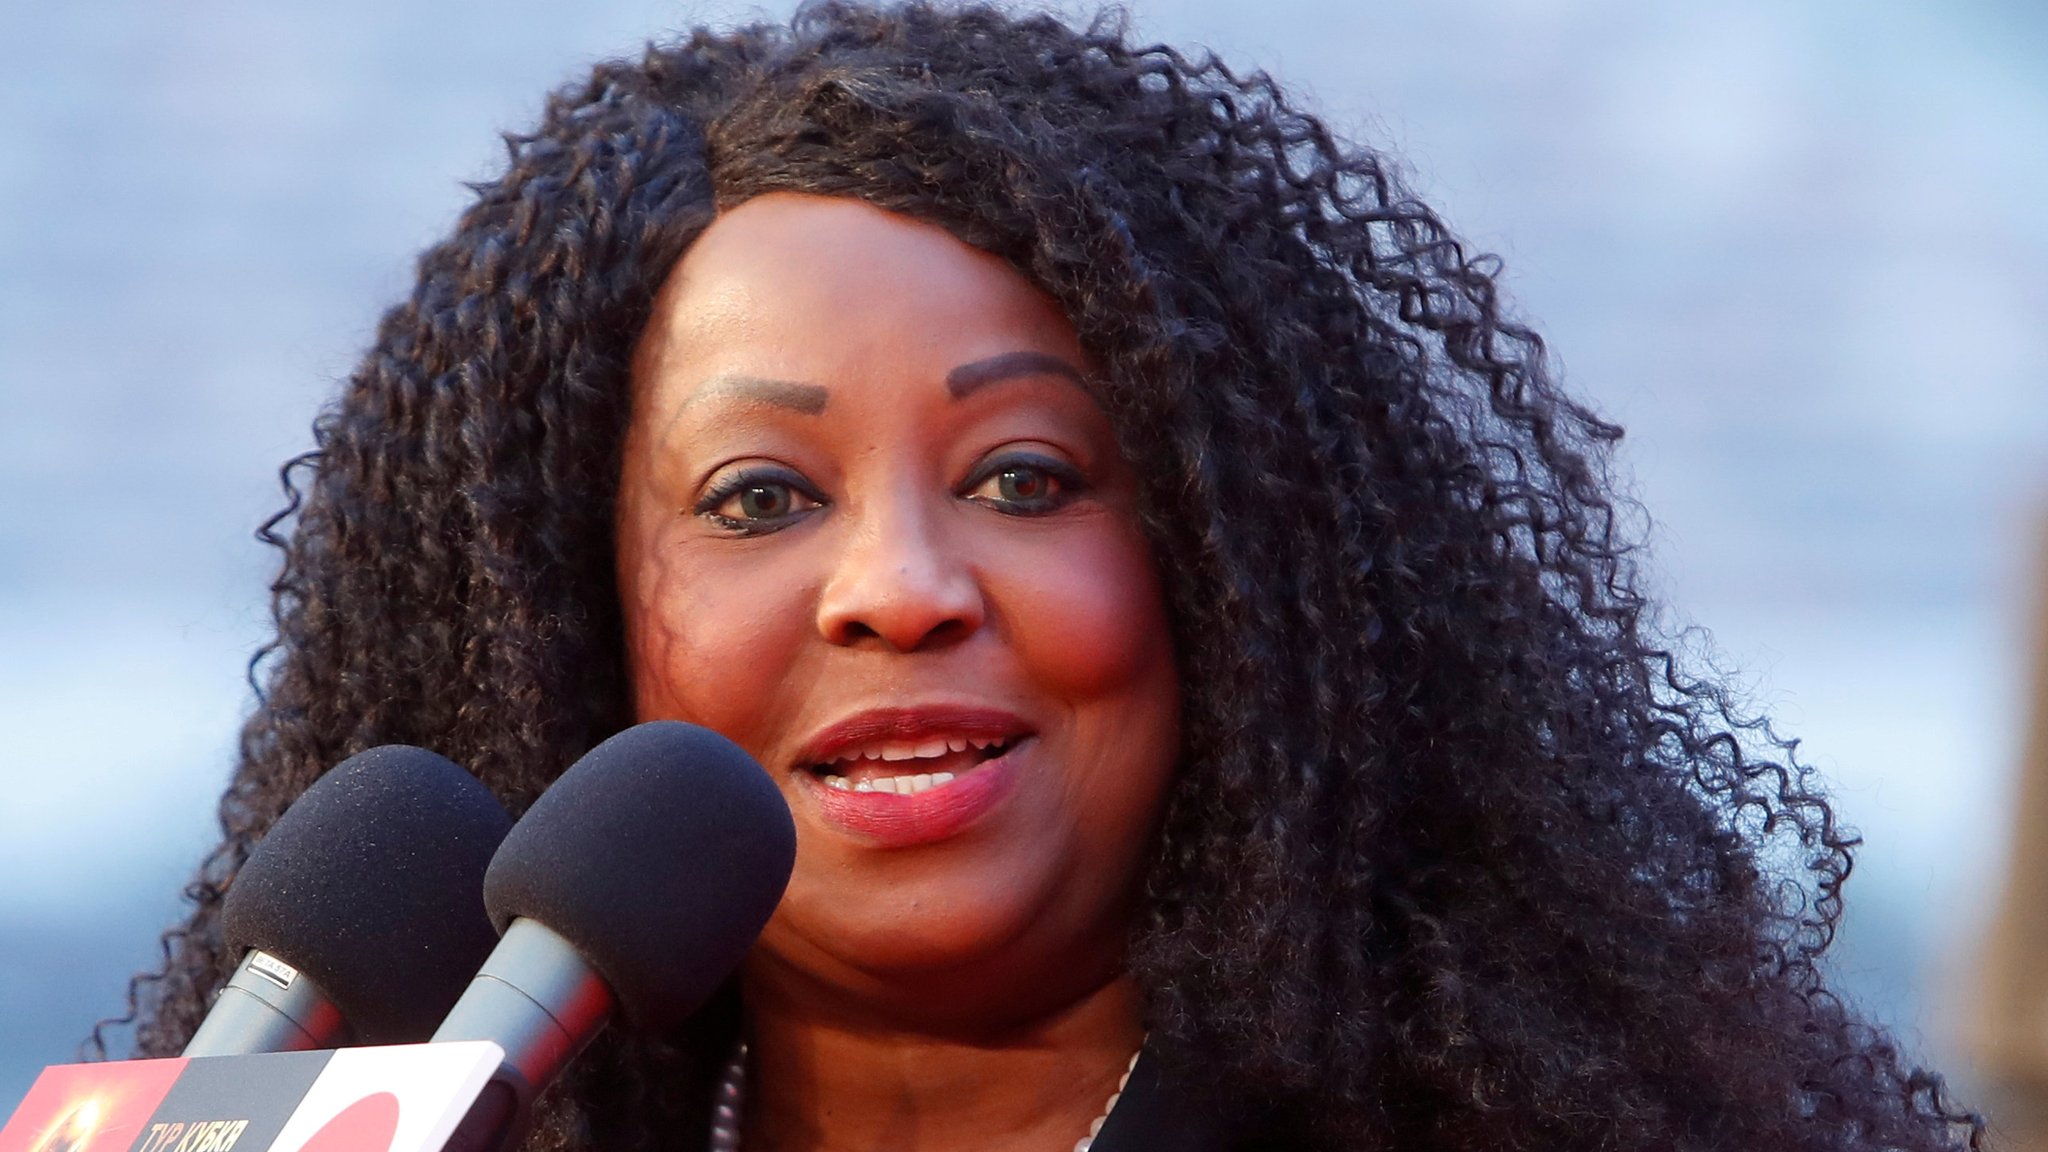 'Some people don't think a black woman should lead Fifa'